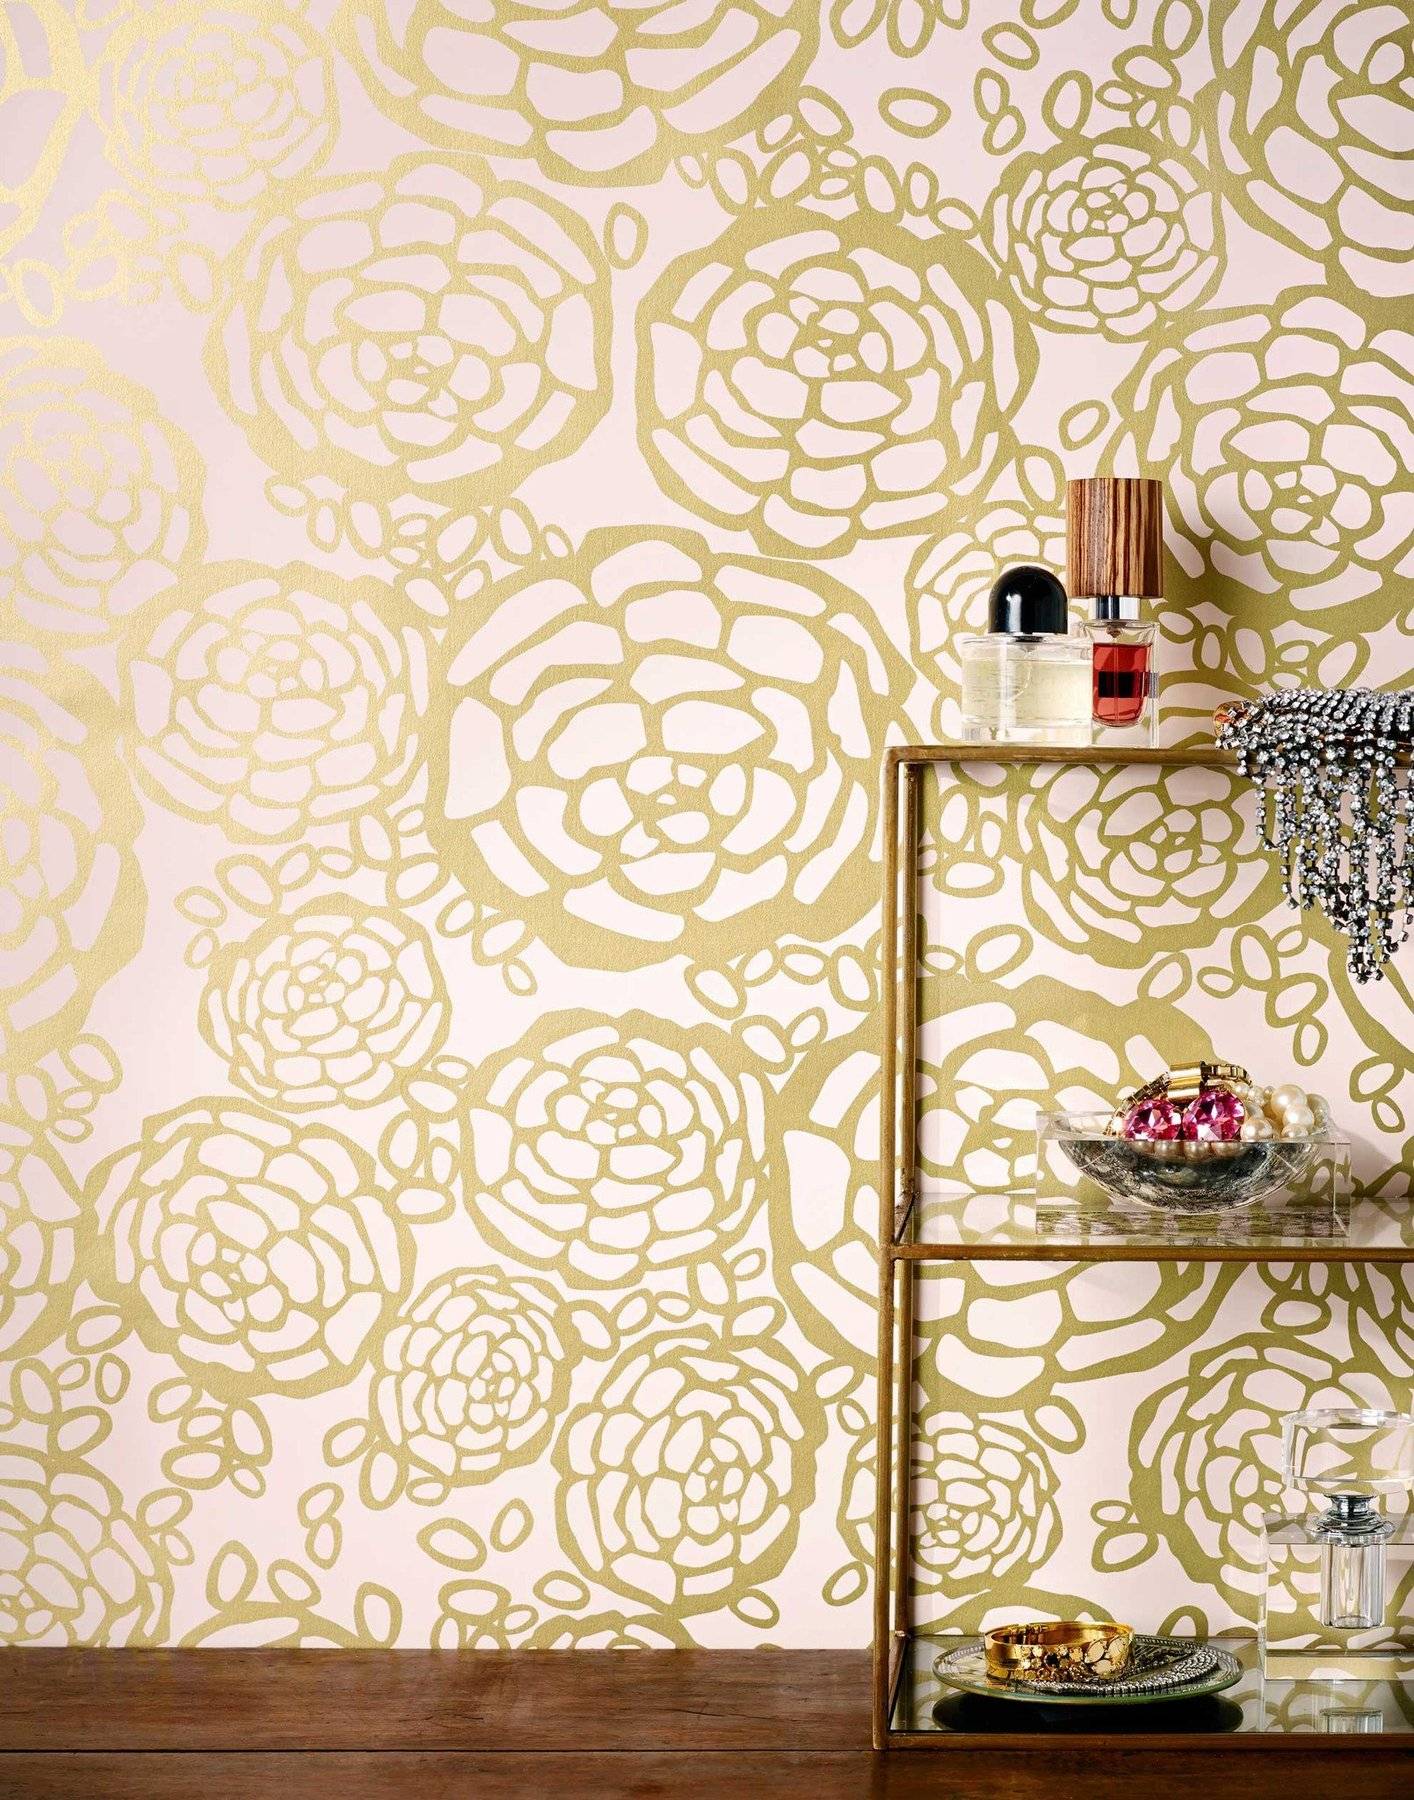 Petal Pusher Wallpaper from Hygge and West-bcd5-4c8d-a804-16a56d5141d6_1800x1800